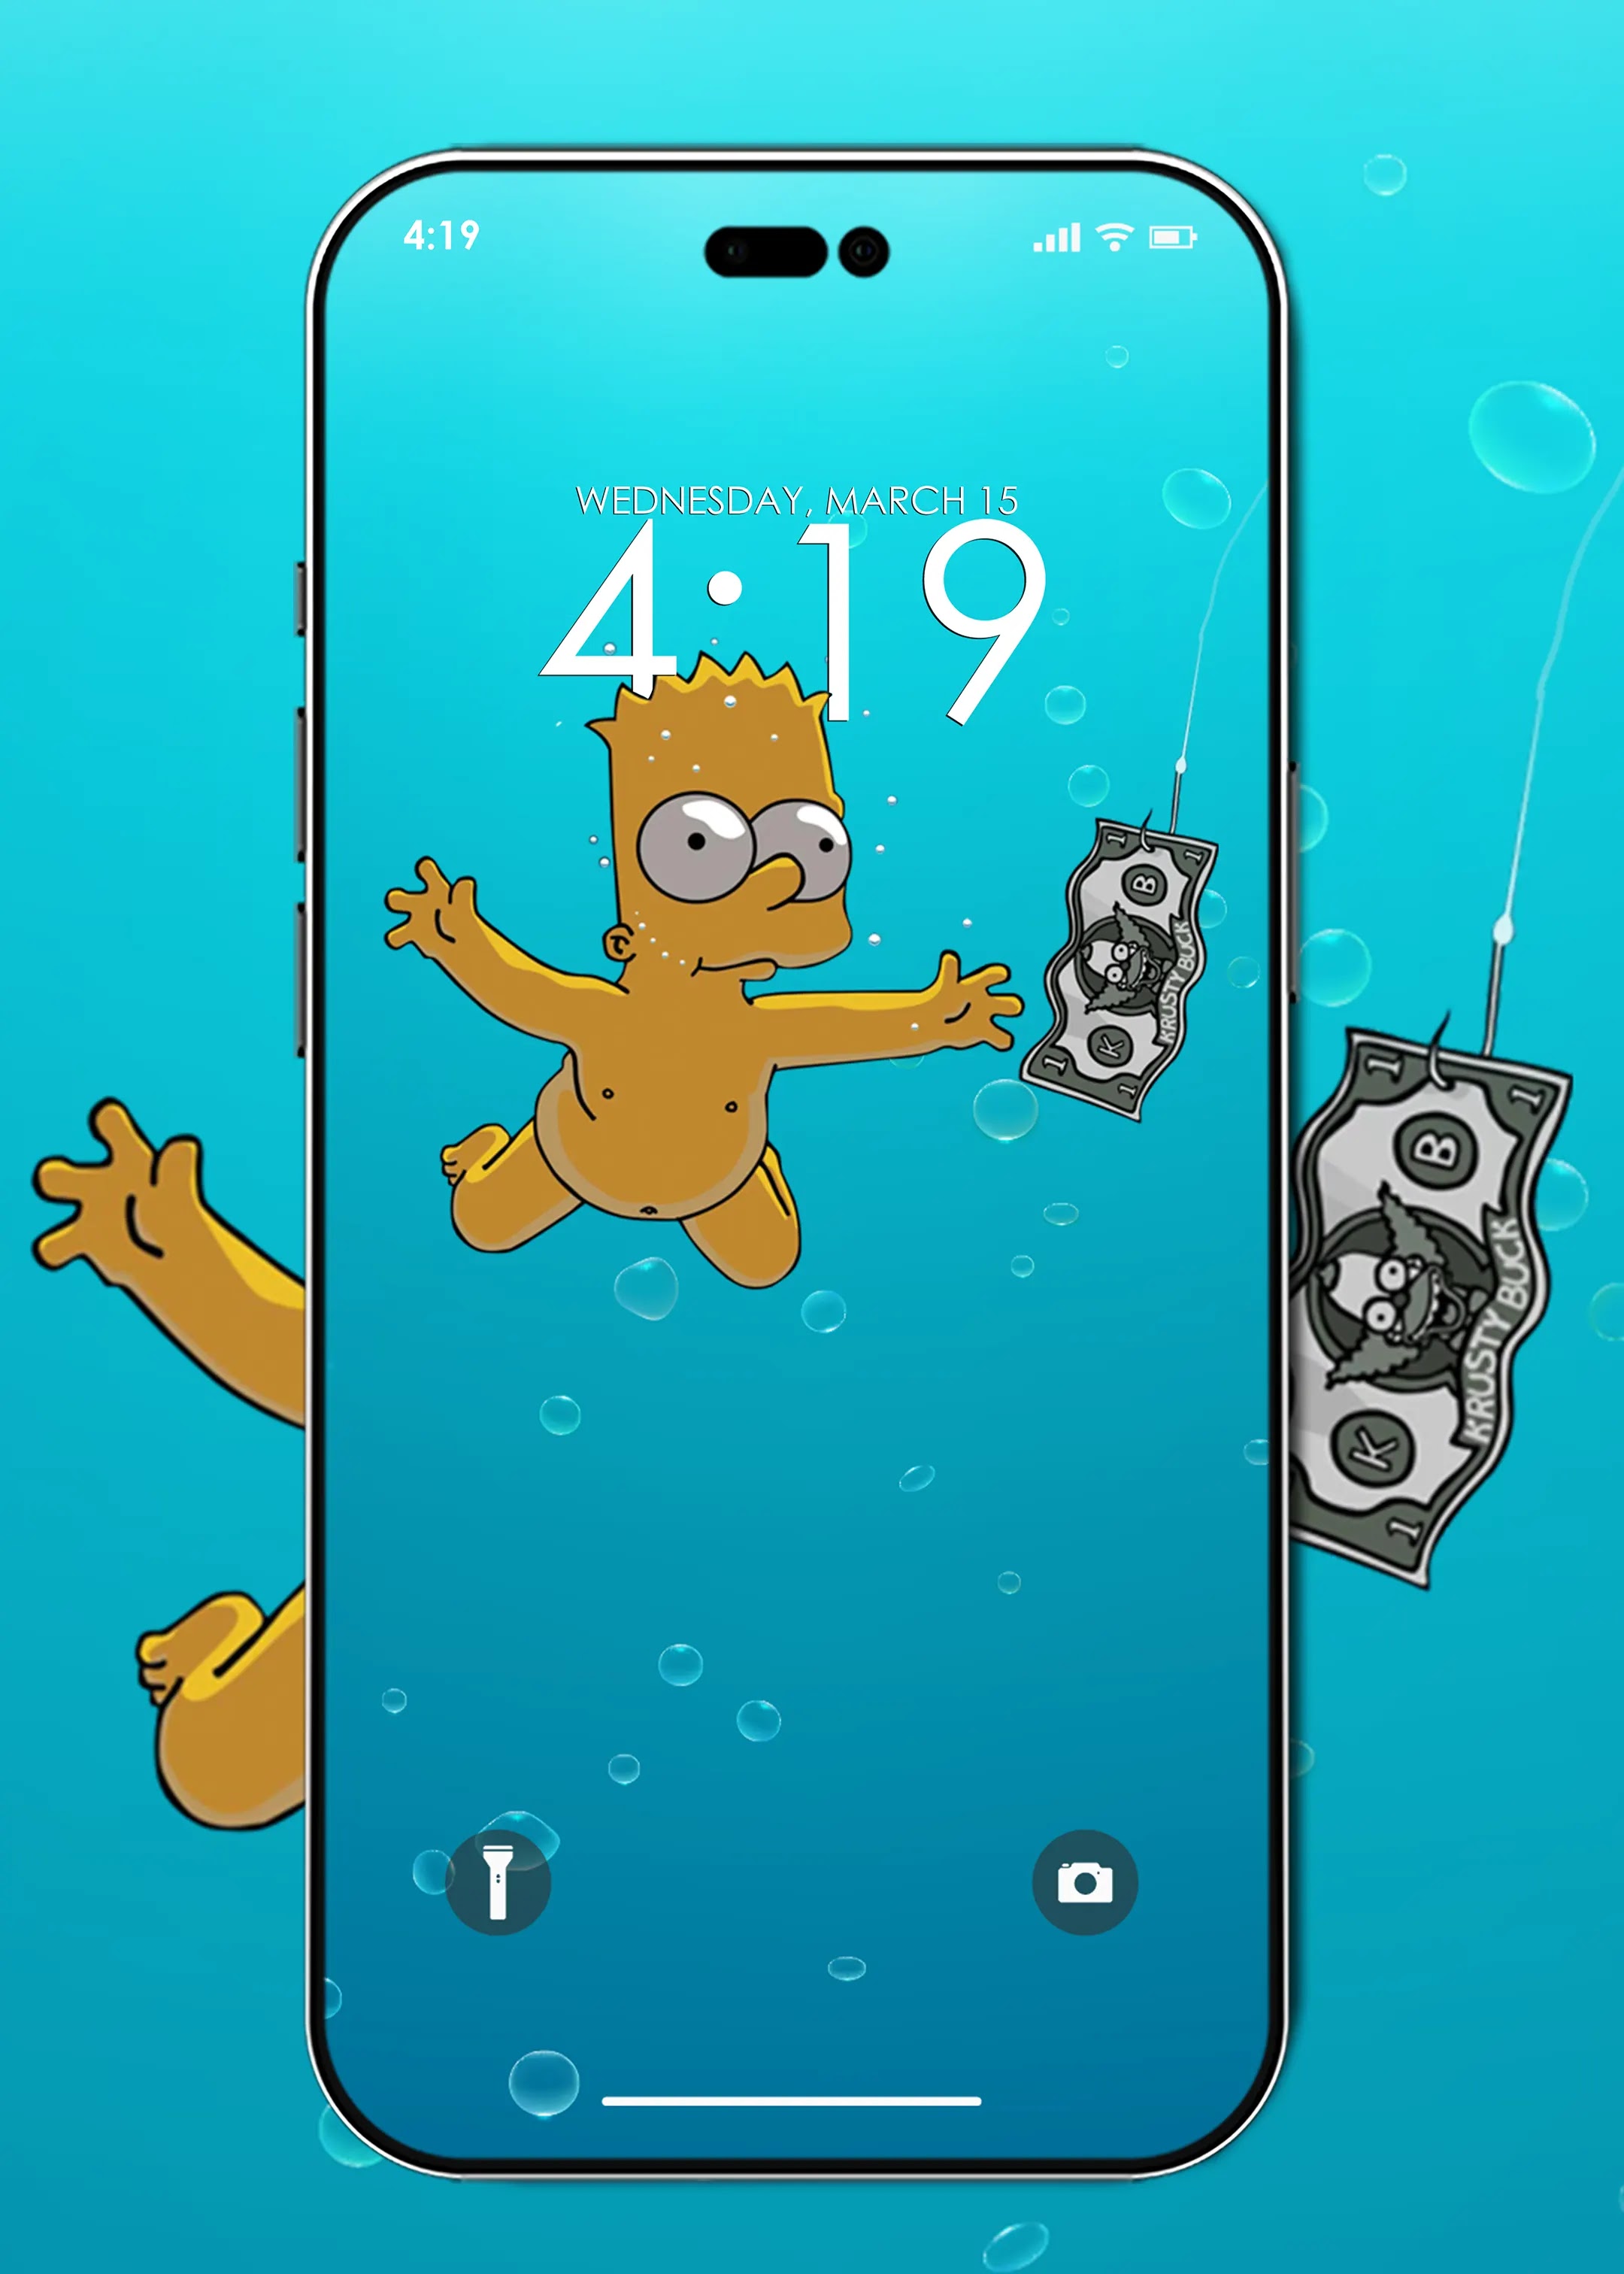 bart in the pool and money in the fishing hook like nirvana nevermind poster wallpaper for phone